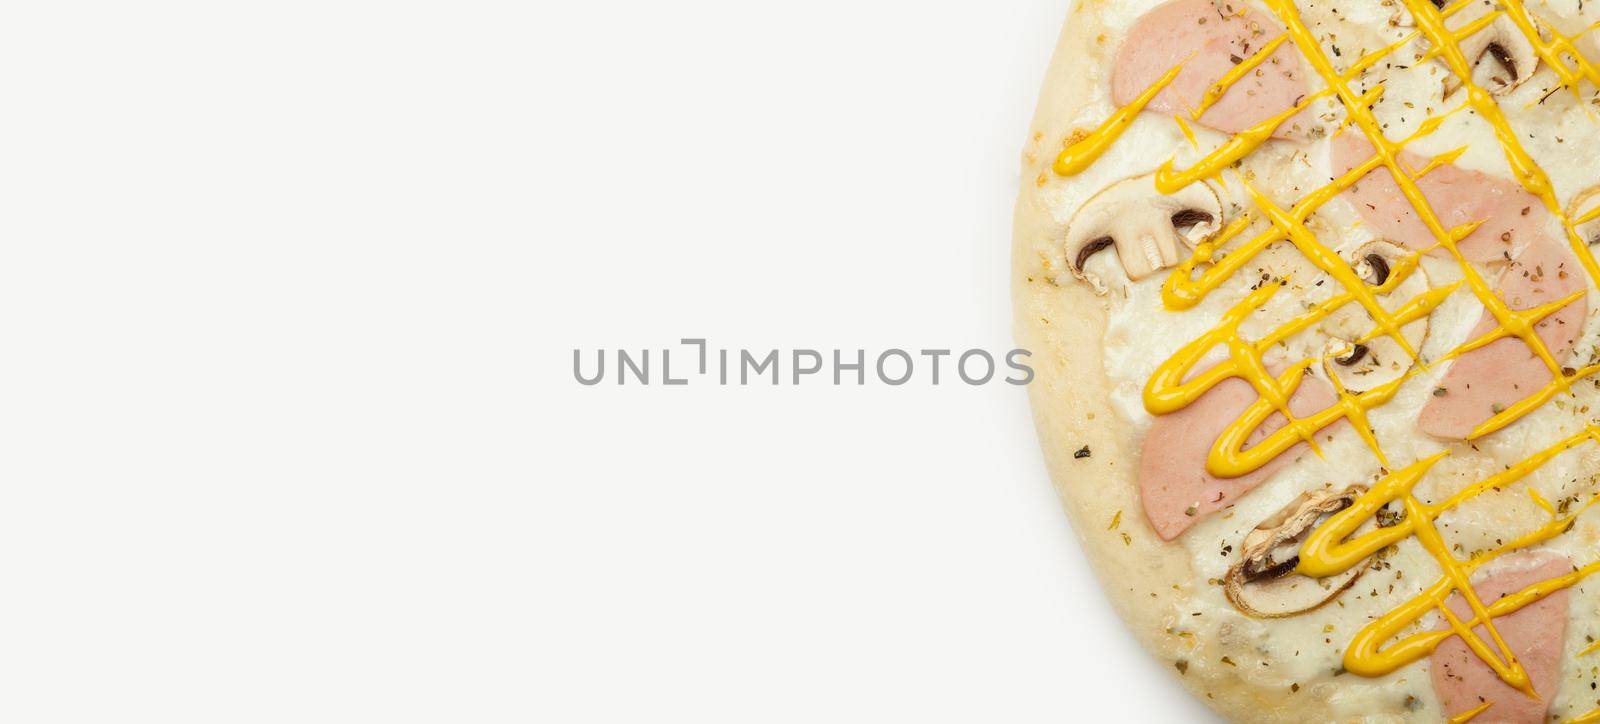 Delicious pizza Ham mushrooms served on a wooden plate, ingredients Signature sauce, mozzarella cheese, ham, mushrooms, mustard sauce on white. Pizzeria promotion poster.